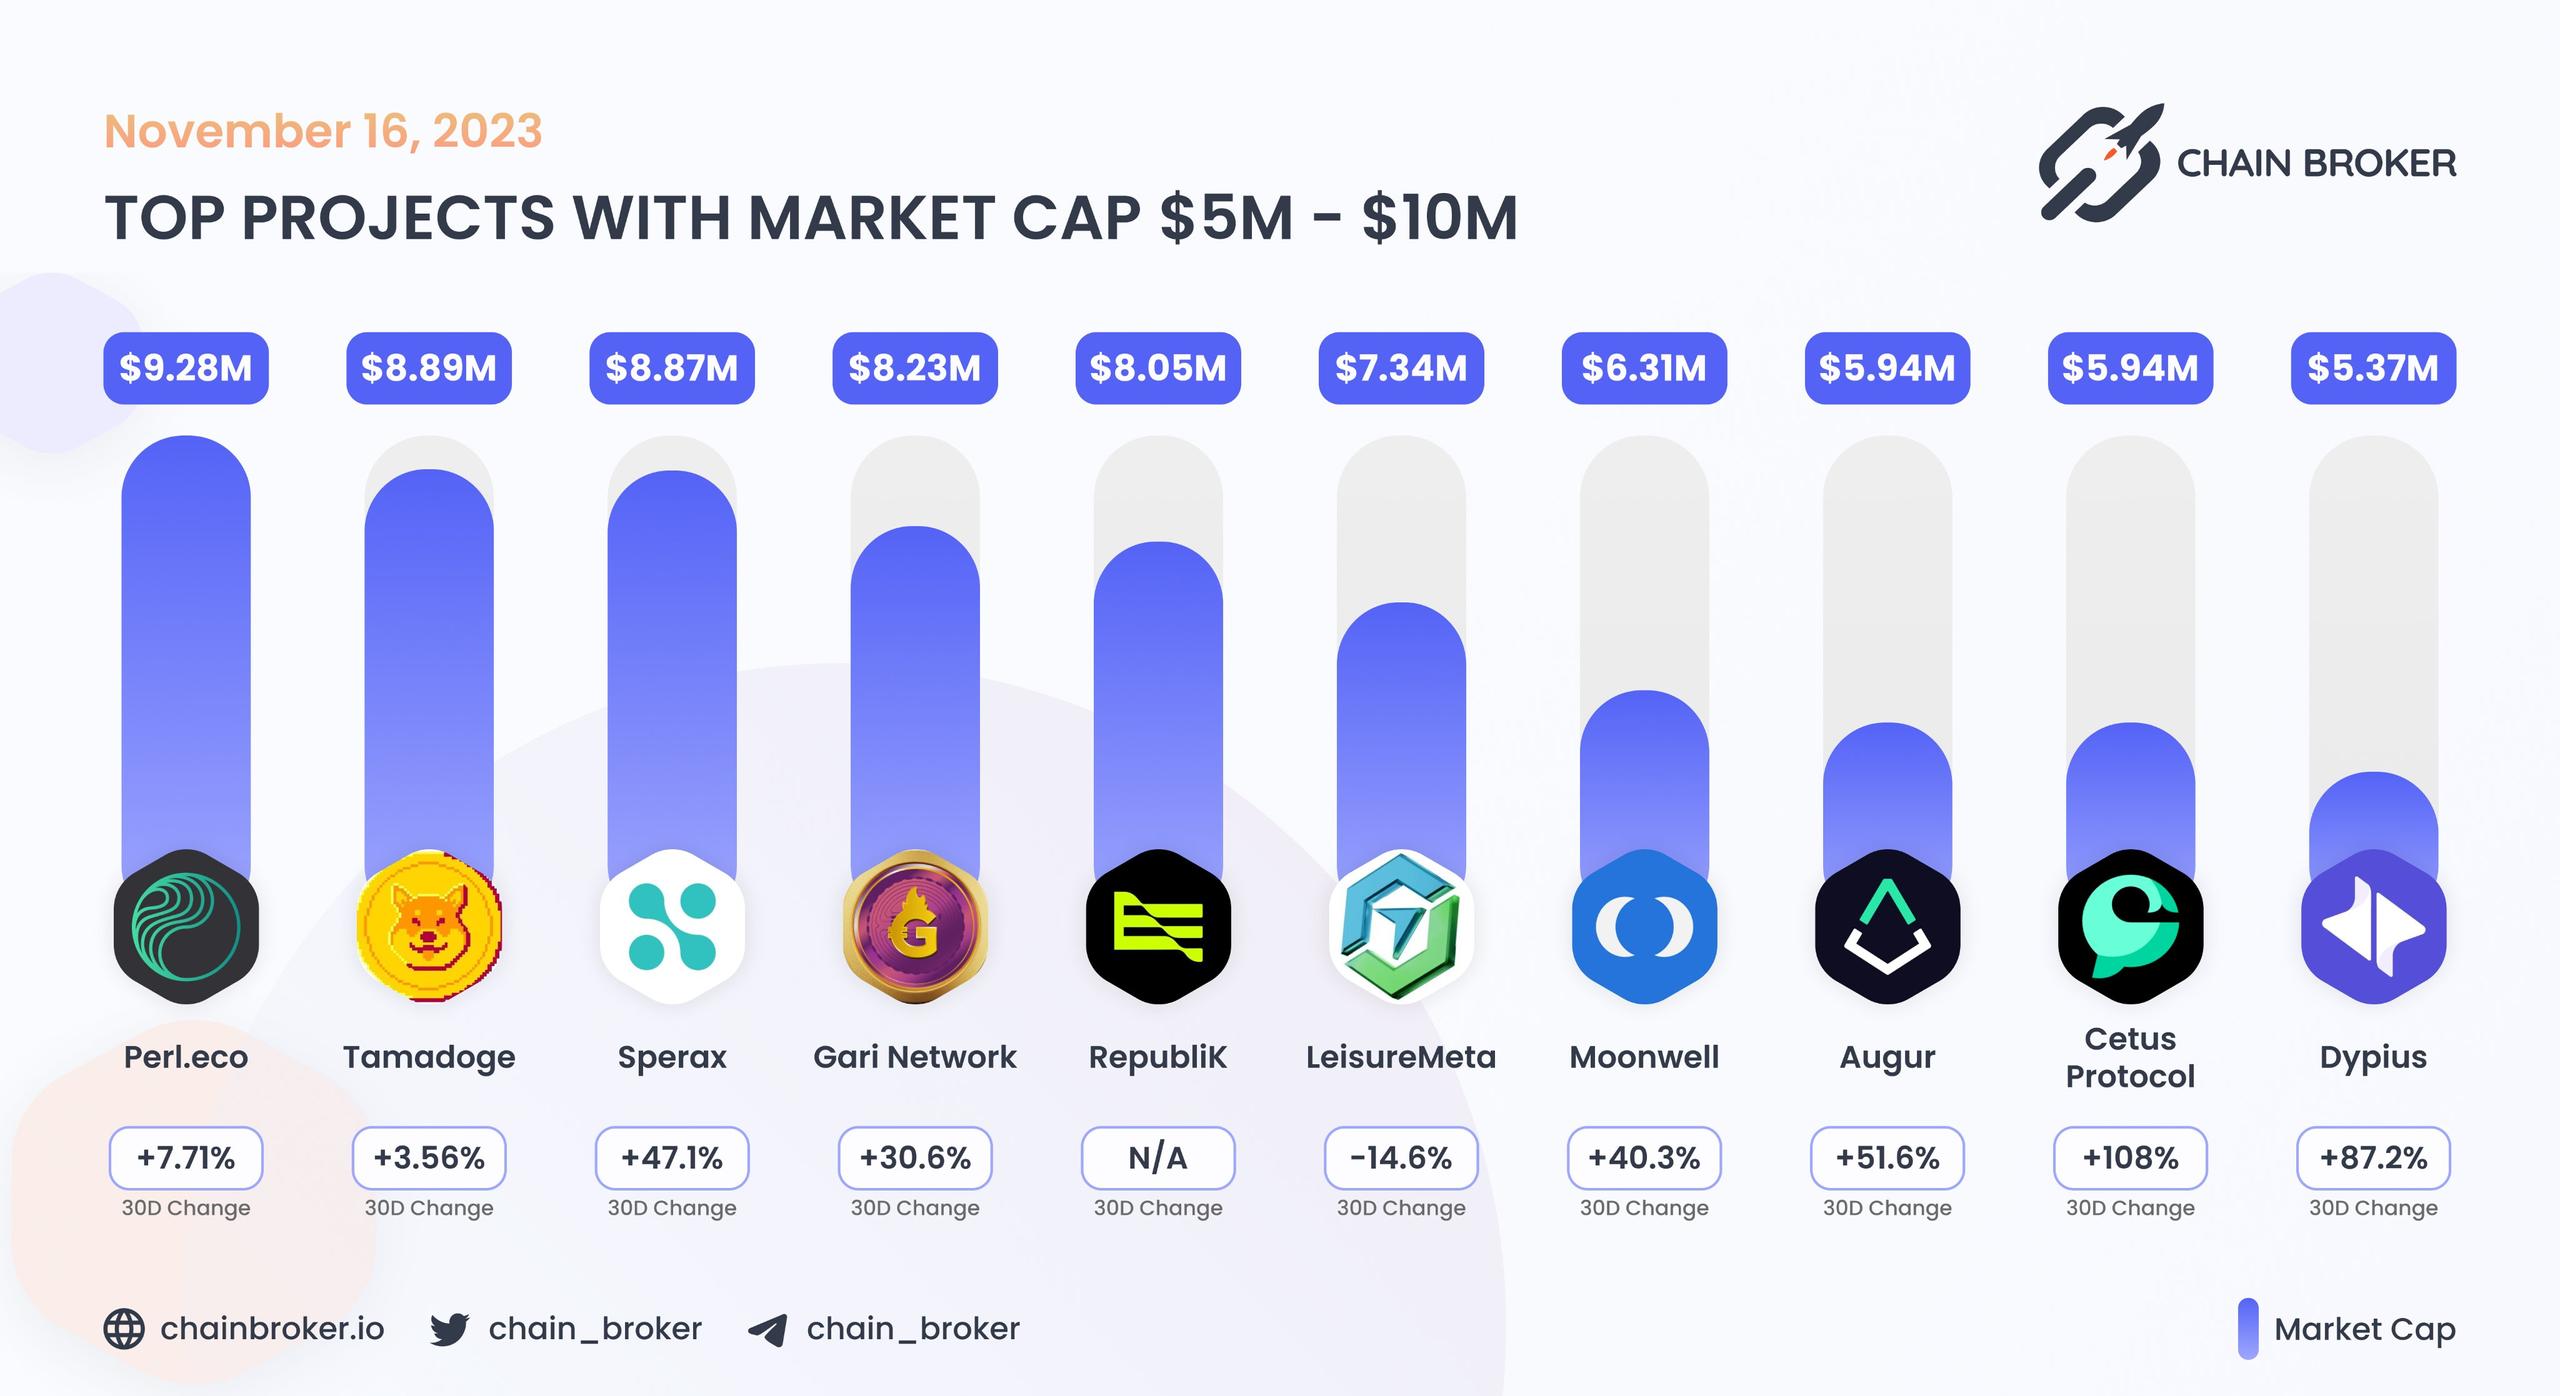 Top projects with Market Cap $5M - $10M